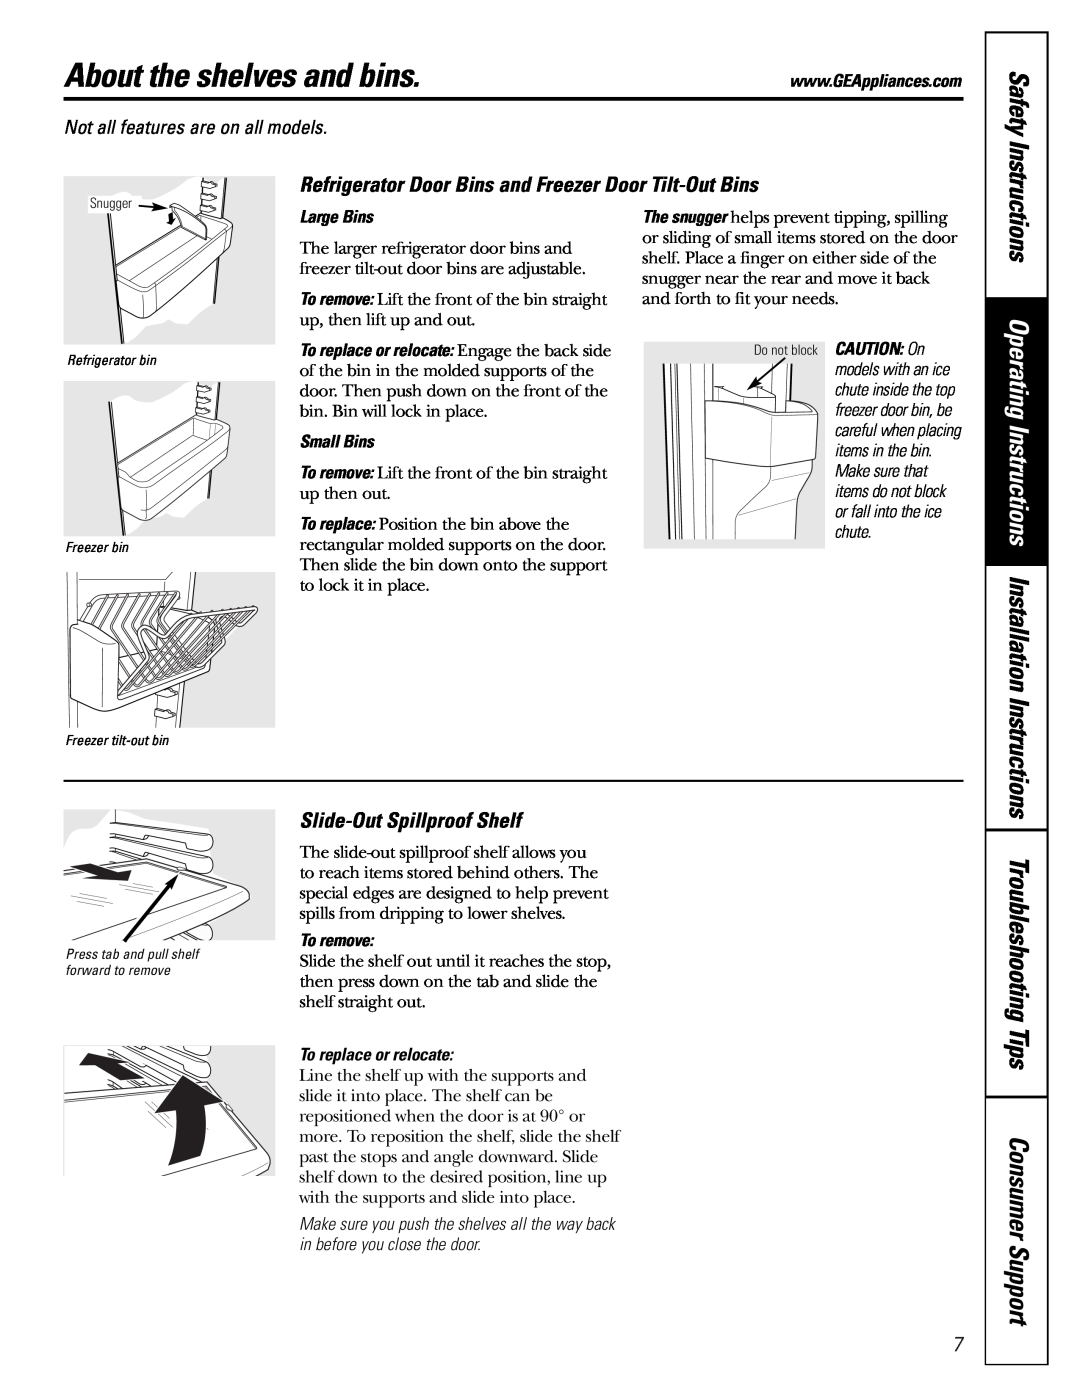 GE Monogram 23 installation instructions About the shelves and bins, Safety, Slide-OutSpillproof Shelf 